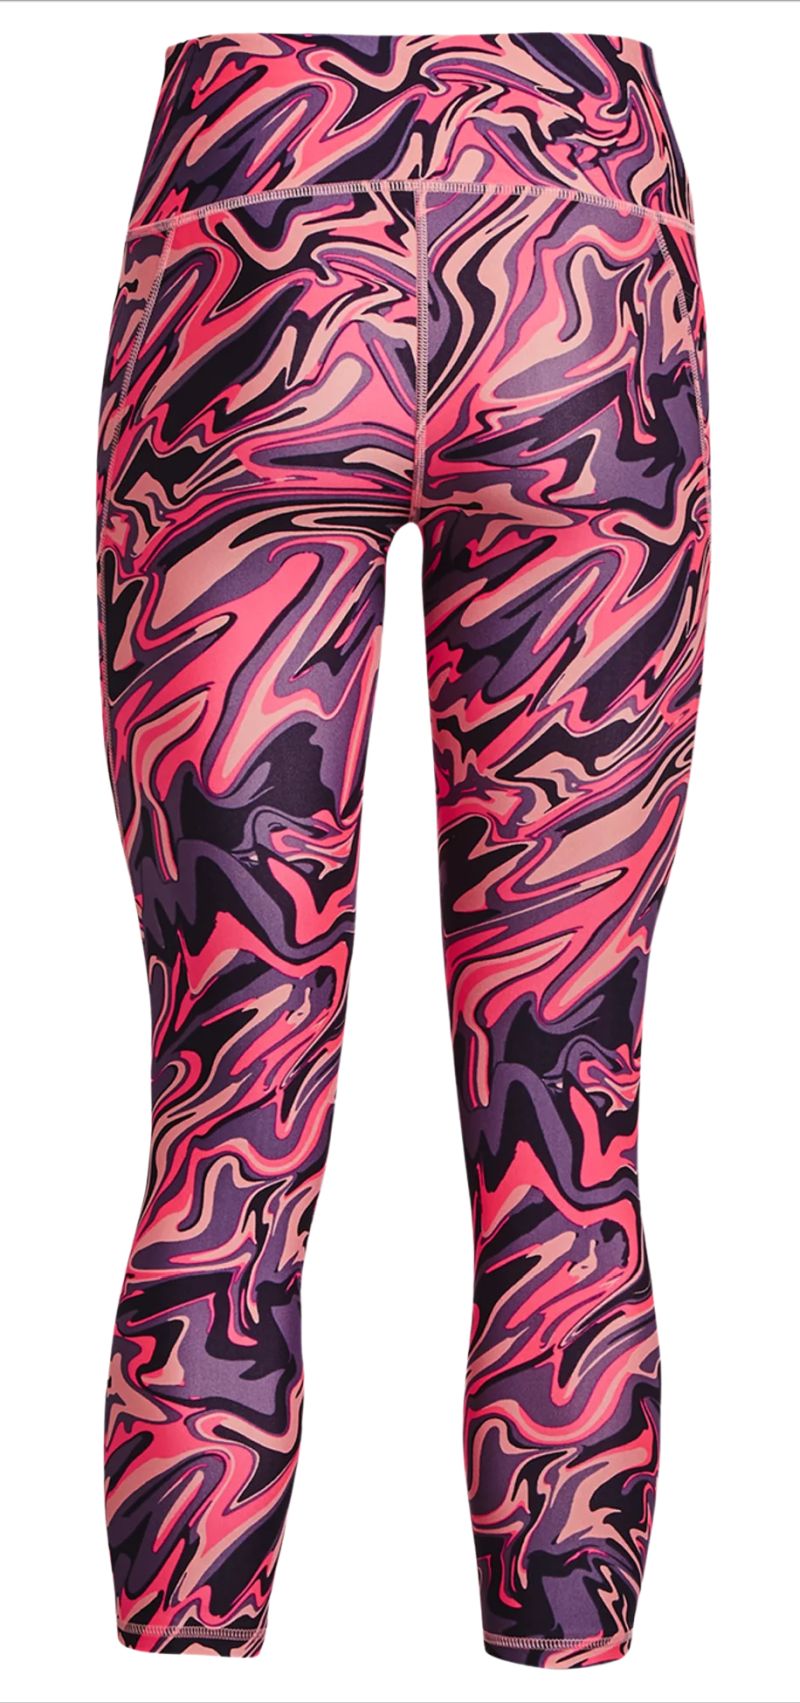 UNDER ARMOUR Women's No-Slip Waistband Printed Ankle Leggings NWT